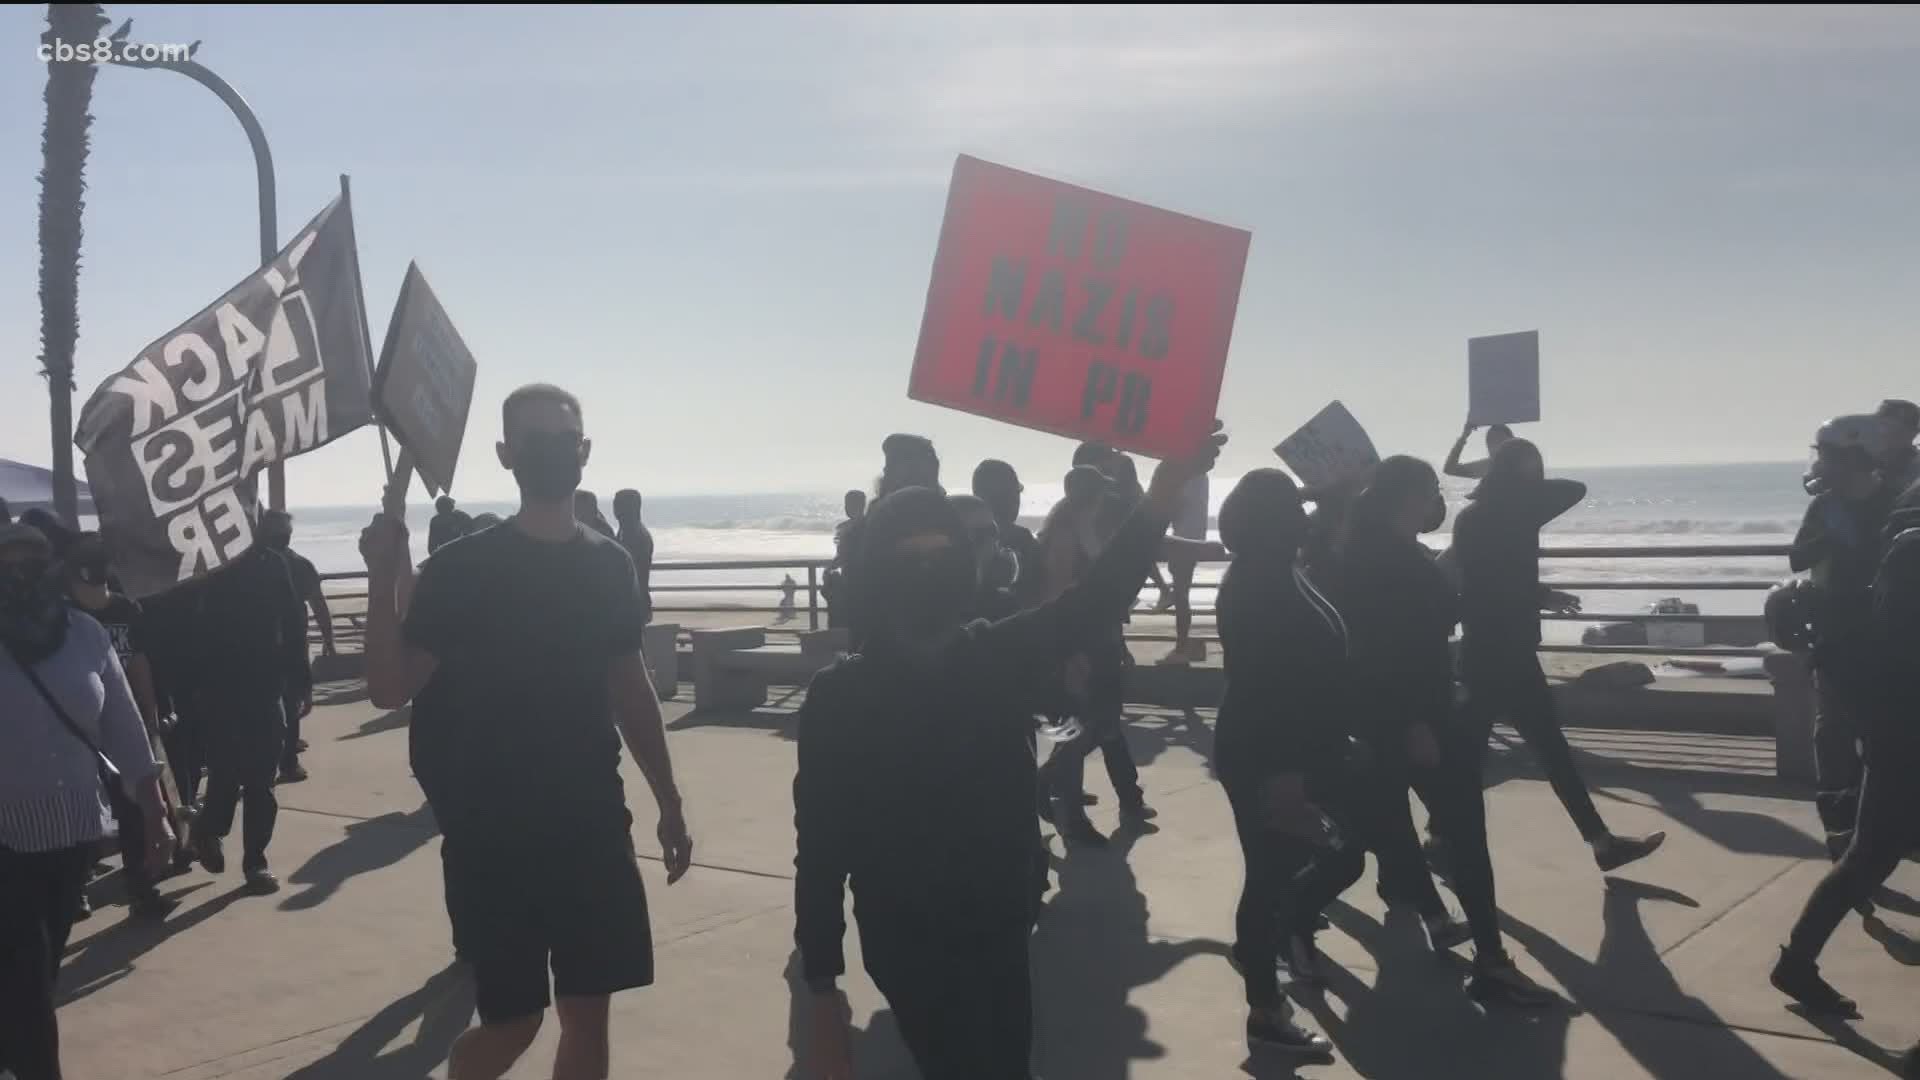 Shortly after 2:30, San Diego Police declared an unlawful assembly due to violent protesters.